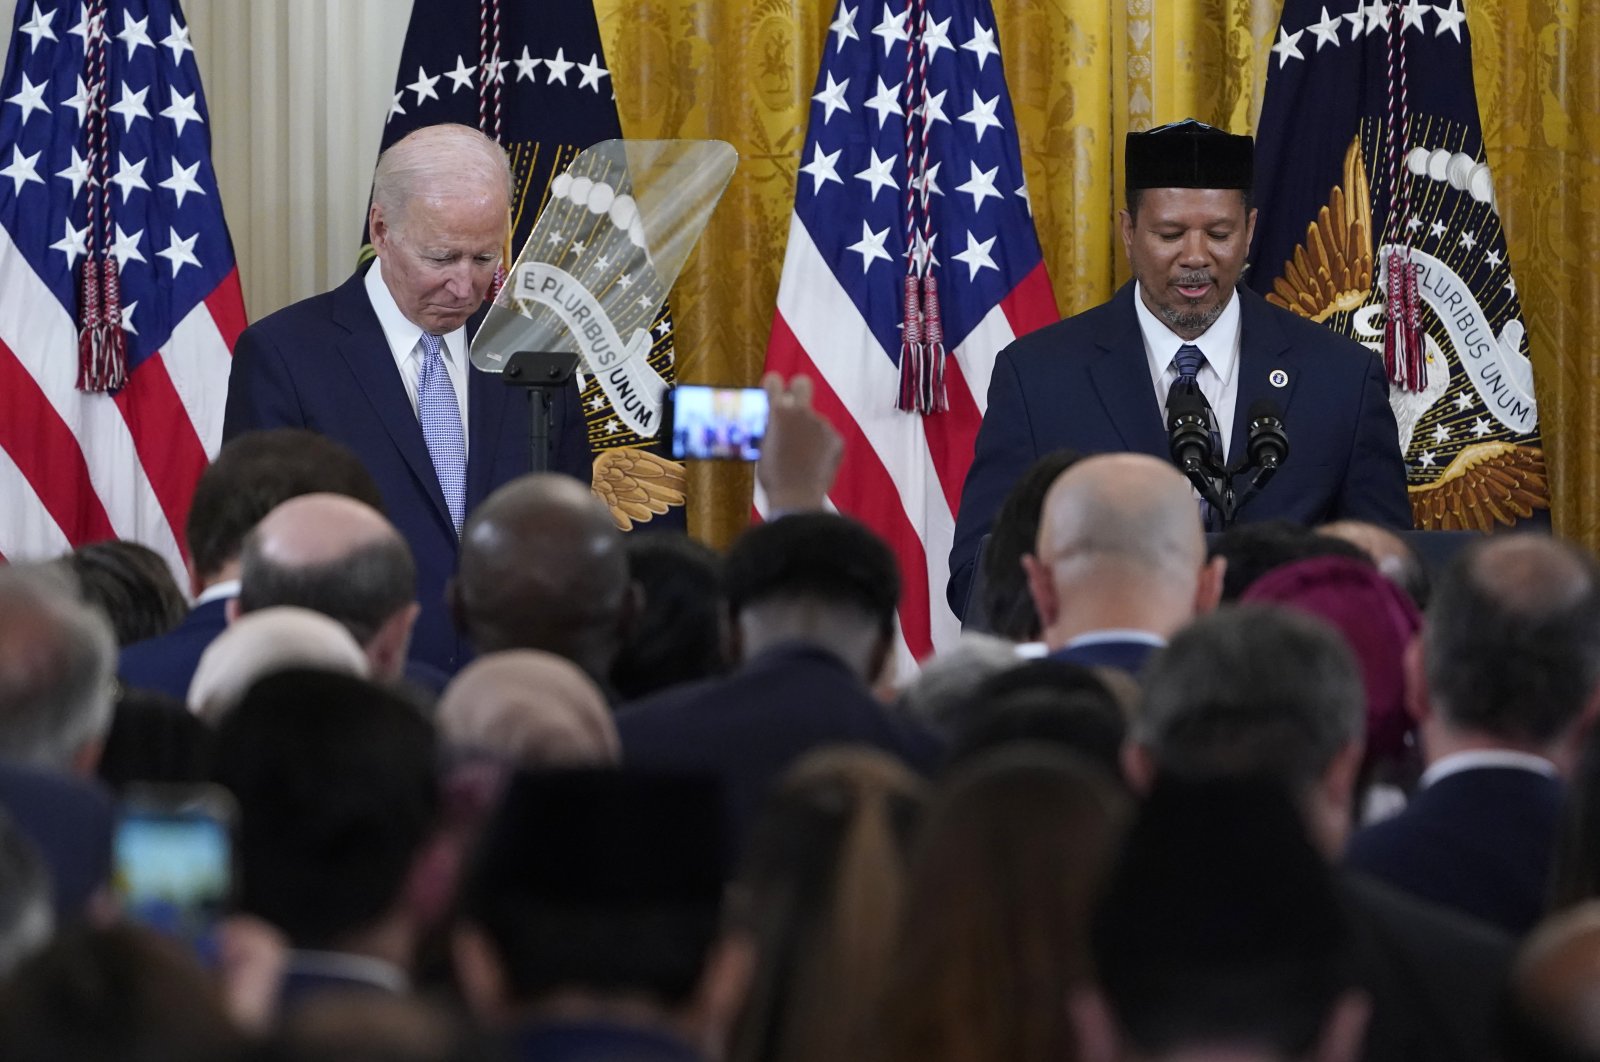 President Joe Biden (L) bows his head as Talib M. Shareef (R), president and imam of the historic Nation&#039;s Mosque Masjid Muhammad in Washington, gives a prayer during a reception to celebrate Ramadan Bayram in the East Room of the White House in Washington, U.S., May 2, 2022. (AP Photo)